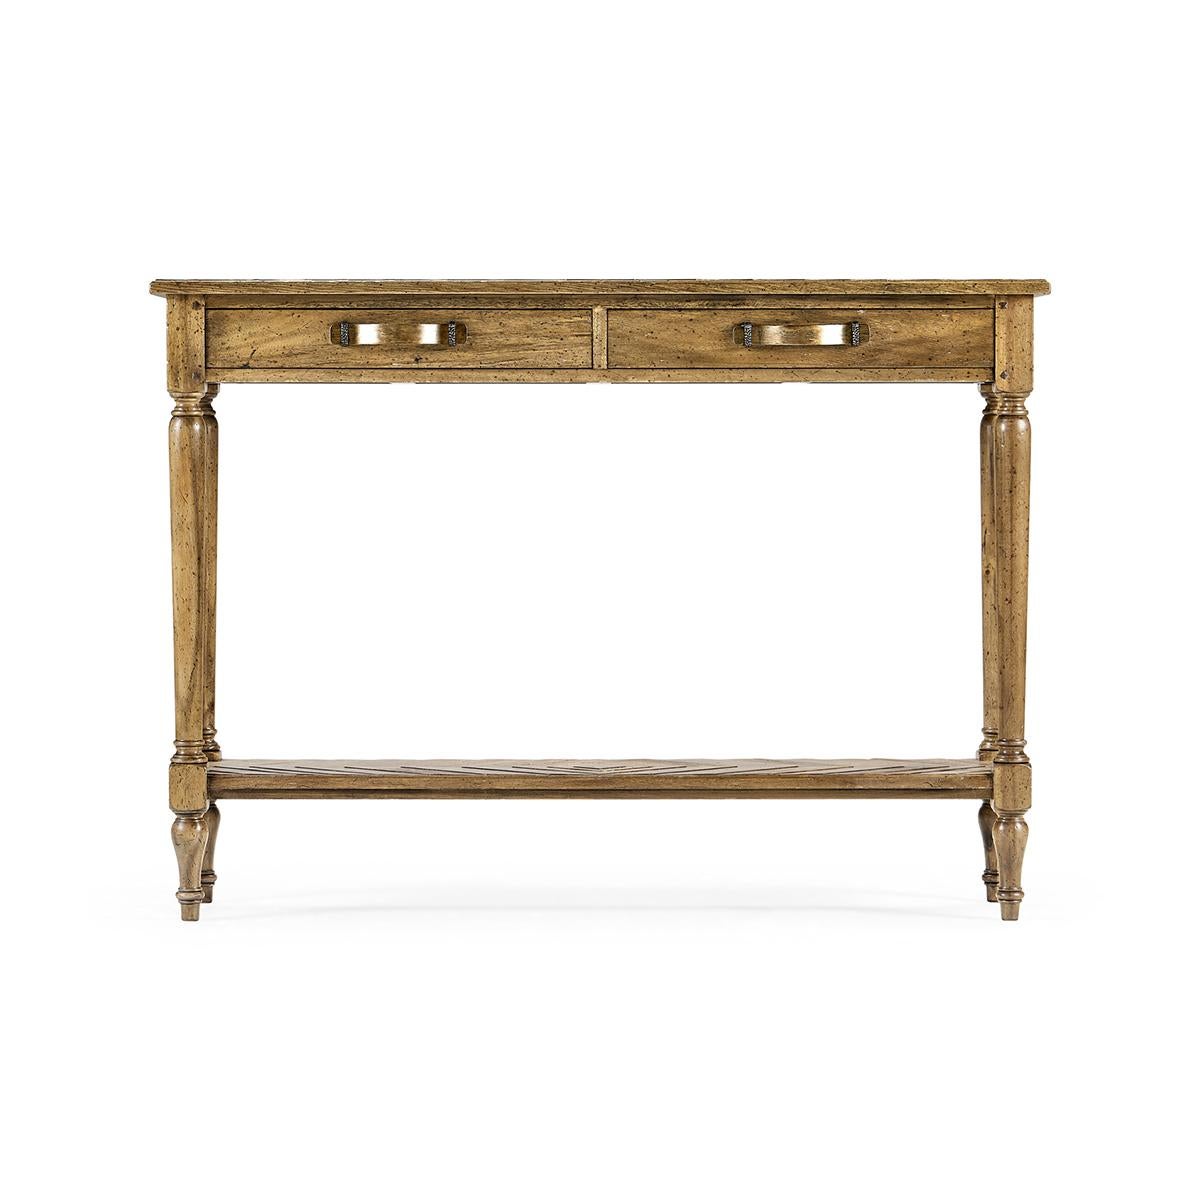 French Provincial console table, with a heavily distressed medium drift finish, this parquet top console has two drawers and under-tier. Bentwood and iron handles contrasting dark geometric inlay to panels. Raised on turned and tapered